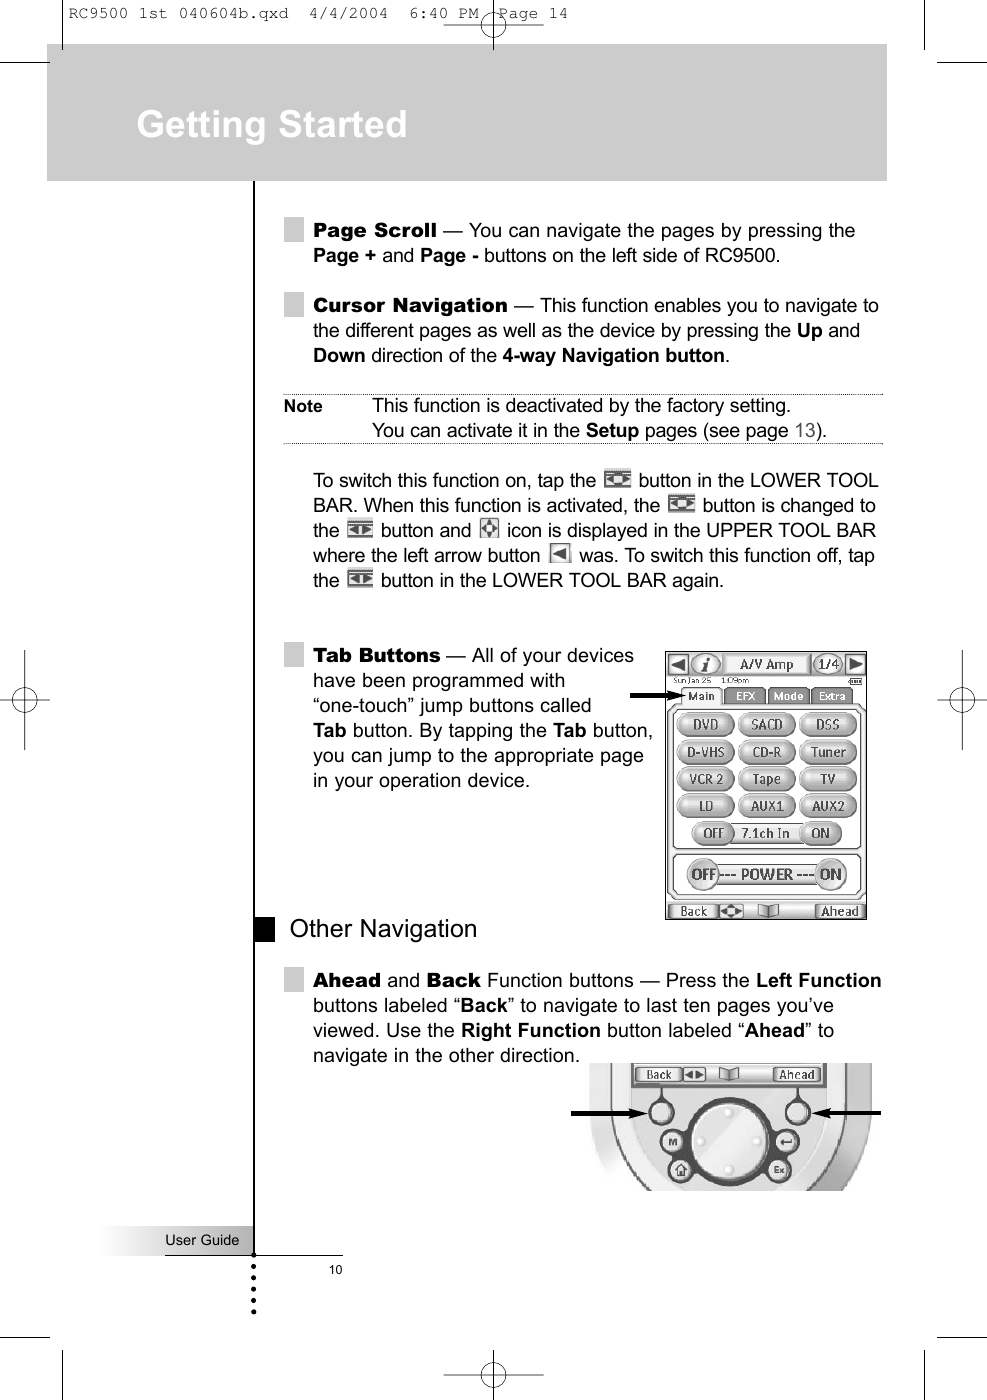 User Guide10Page Scroll — You can navigate the pages by pressing thePage + and Page - buttons on the left side of RC9500.  Cursor Navigation — This function enables you to navigate tothe different pages as well as the device by pressing the Up andDown direction of the 4-way Navigation button. Note This function is deactivated by the factory setting. You can activate it in the Setup pages (see page 13).To switch this function on, tap the  button in the LOWER TOOLBAR. When this function is activated, the  button is changed tothe  button and  icon is displayed in the UPPER TOOL BARwhere the left arrow button  was. To switch this function off, tapthe  button in the LOWER TOOL BAR again.Tab Buttons — All of your devices have been programmed with “one-touch” jump buttons called Tab button. By tapping the Tab button, you can jump to the appropriate page in your operation device. Other NavigationAhead and Back Function buttons — Press the Left Functionbuttons labeled “Back” to navigate to last ten pages you’veviewed. Use the Right Function button labeled “Ahead” tonavigate in the other direction.Getting StartedRC9500 1st 040604b.qxd  4/4/2004  6:40 PM  Page 14